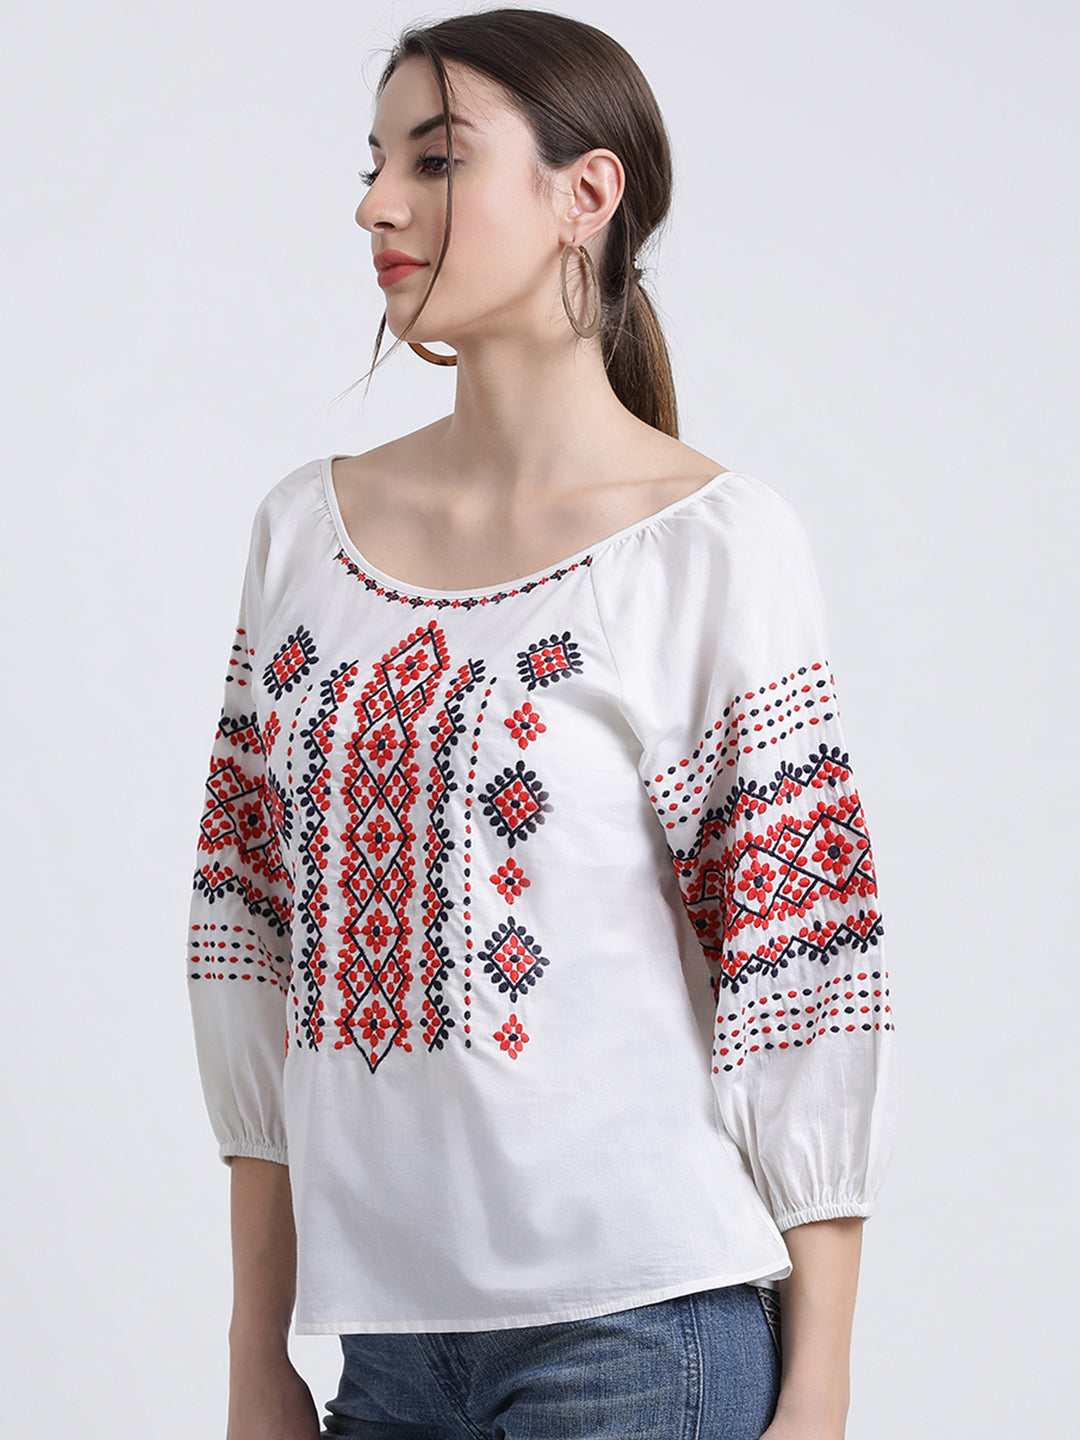 Zink London Women's White Embroidered Regular Top